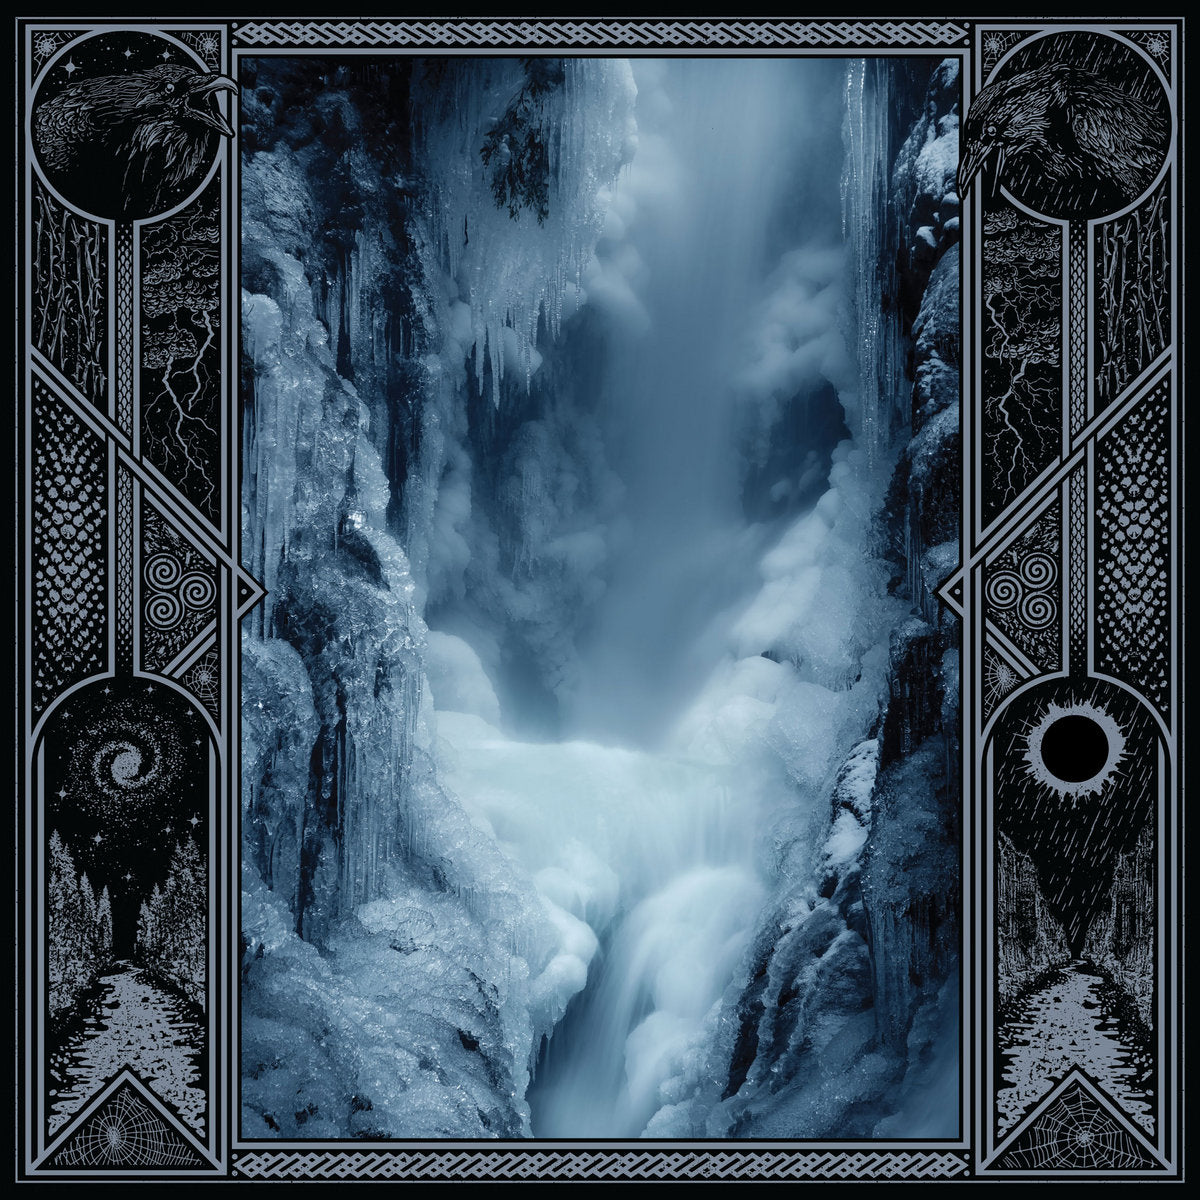 WOLVES IN THE THRONE ROOM "Crypt Of Ancestral Knowledge" CD